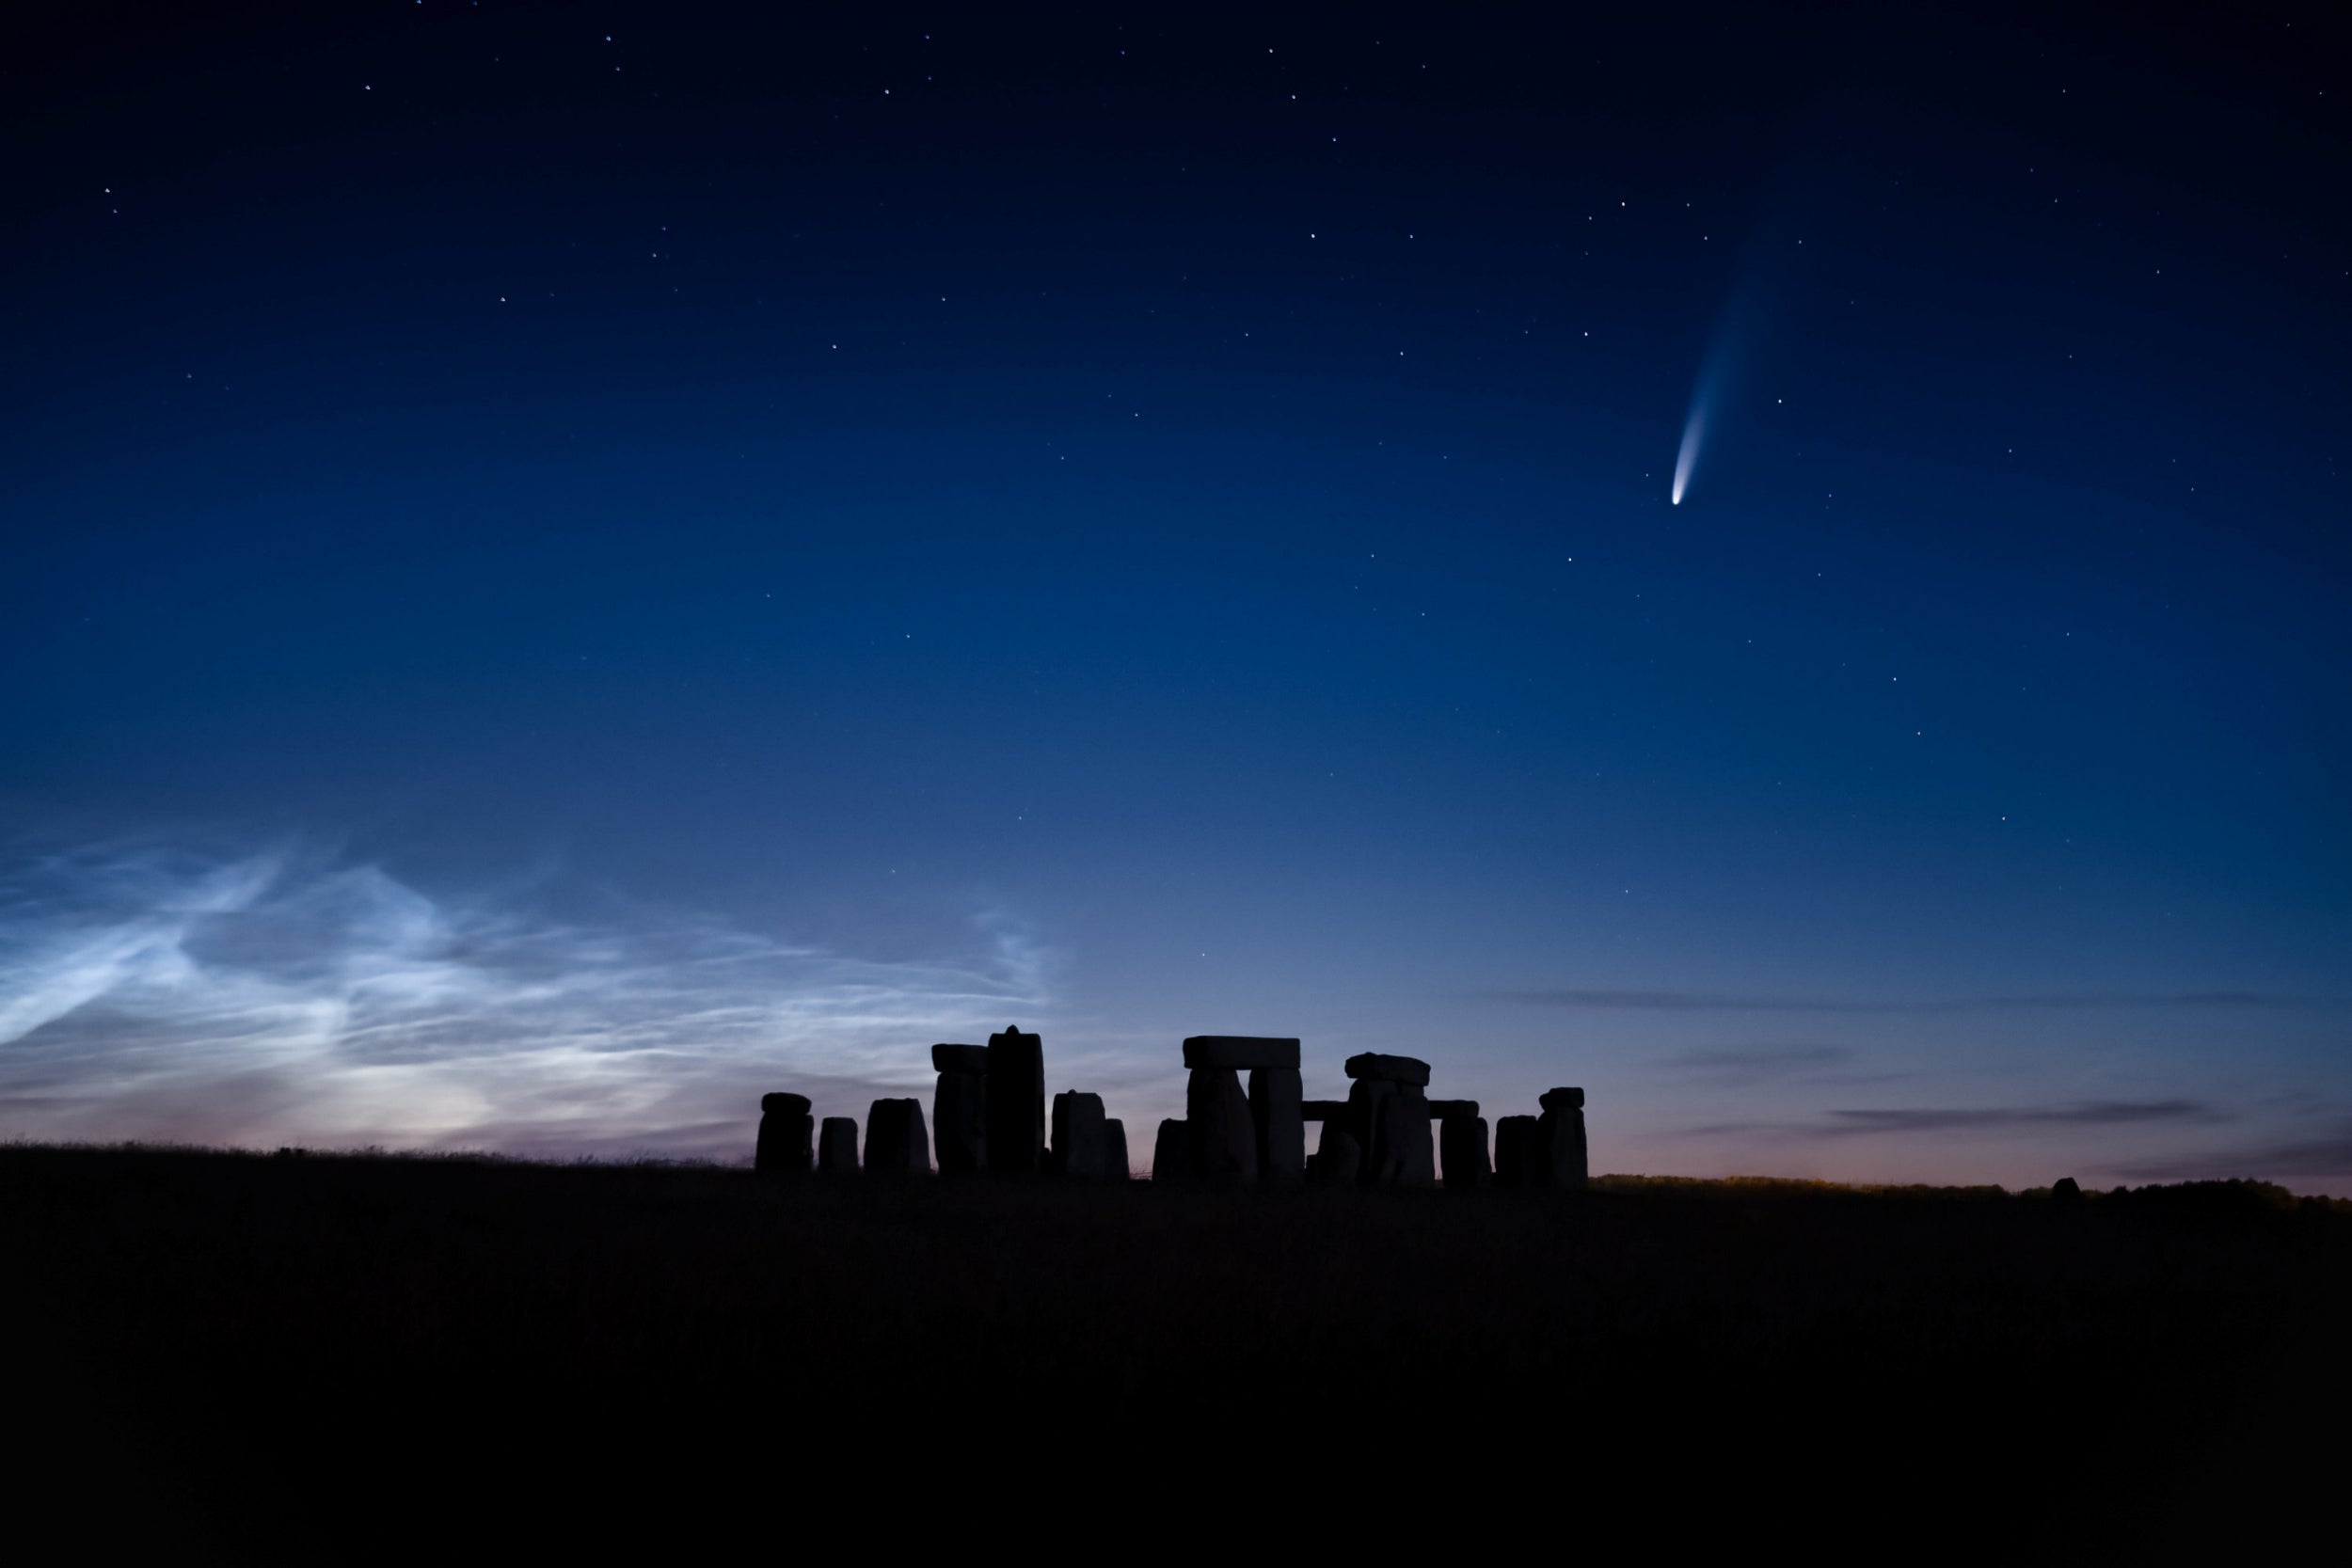 Neowise Comet Seen Over Stonehenge In Stunning New Image The